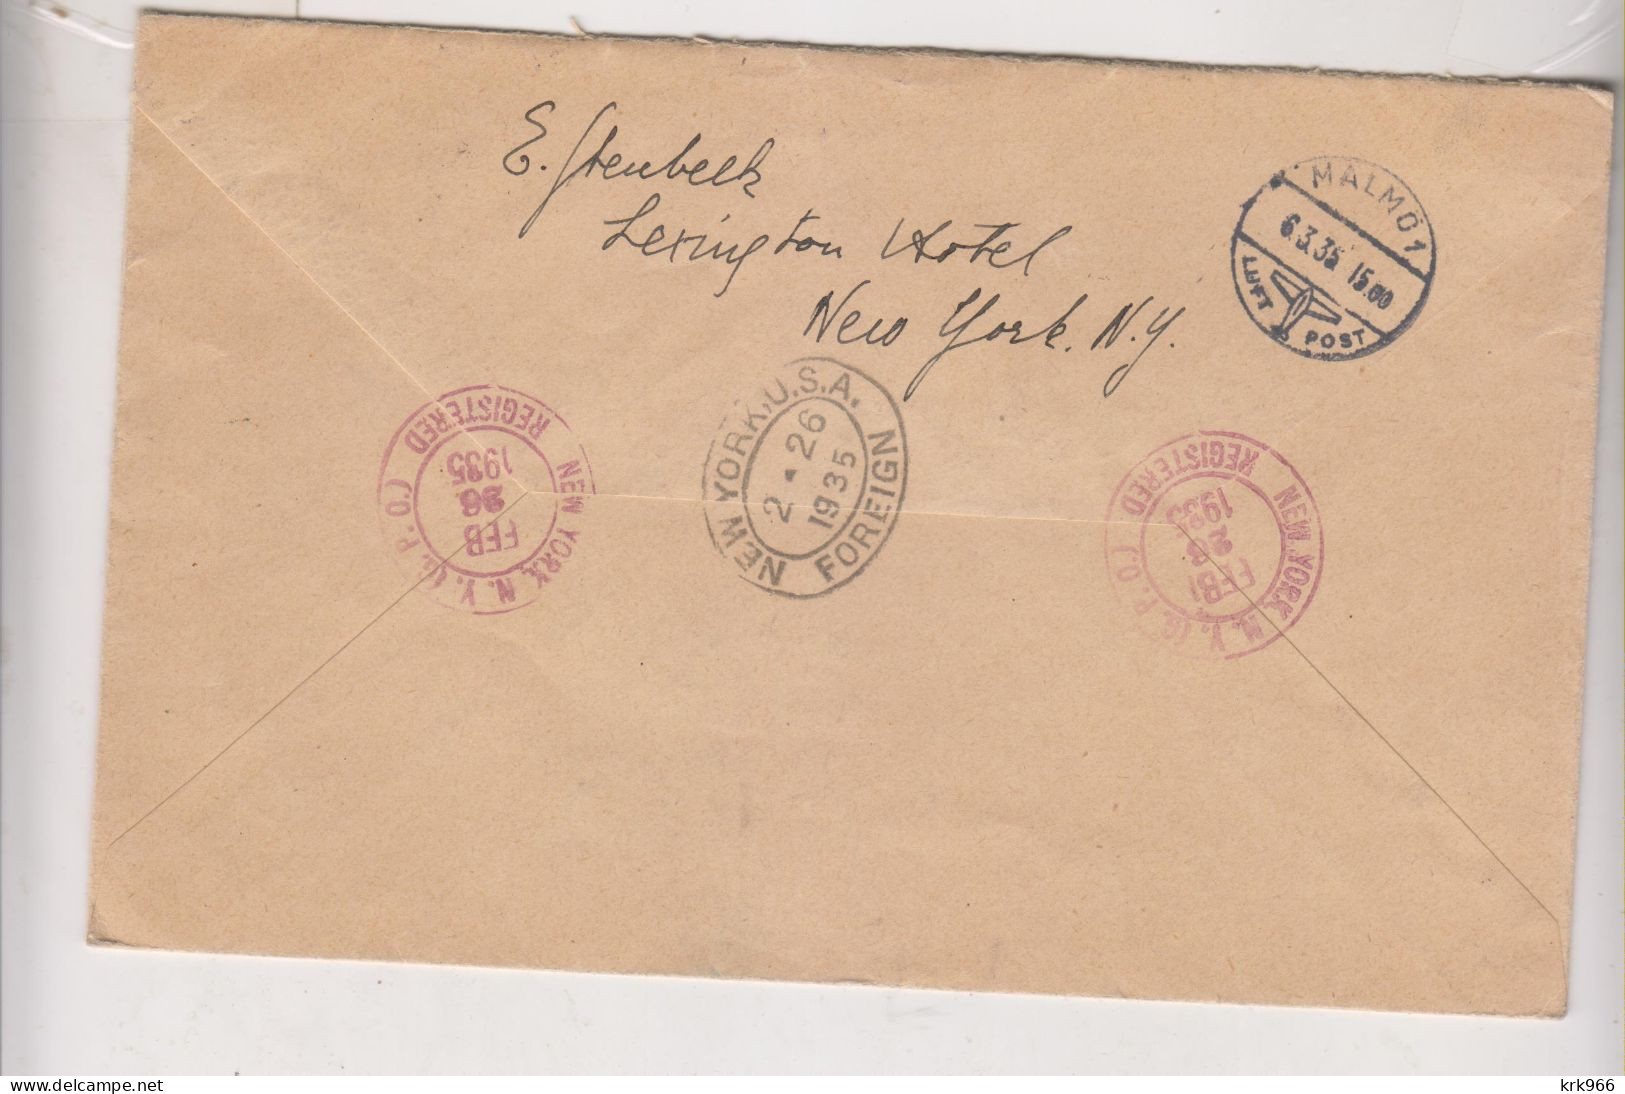 UNITED STATES 1935 NEW YORK Registered Airmail Cover To SWEDEN Special Delivery - 1c. 1918-1940 Storia Postale